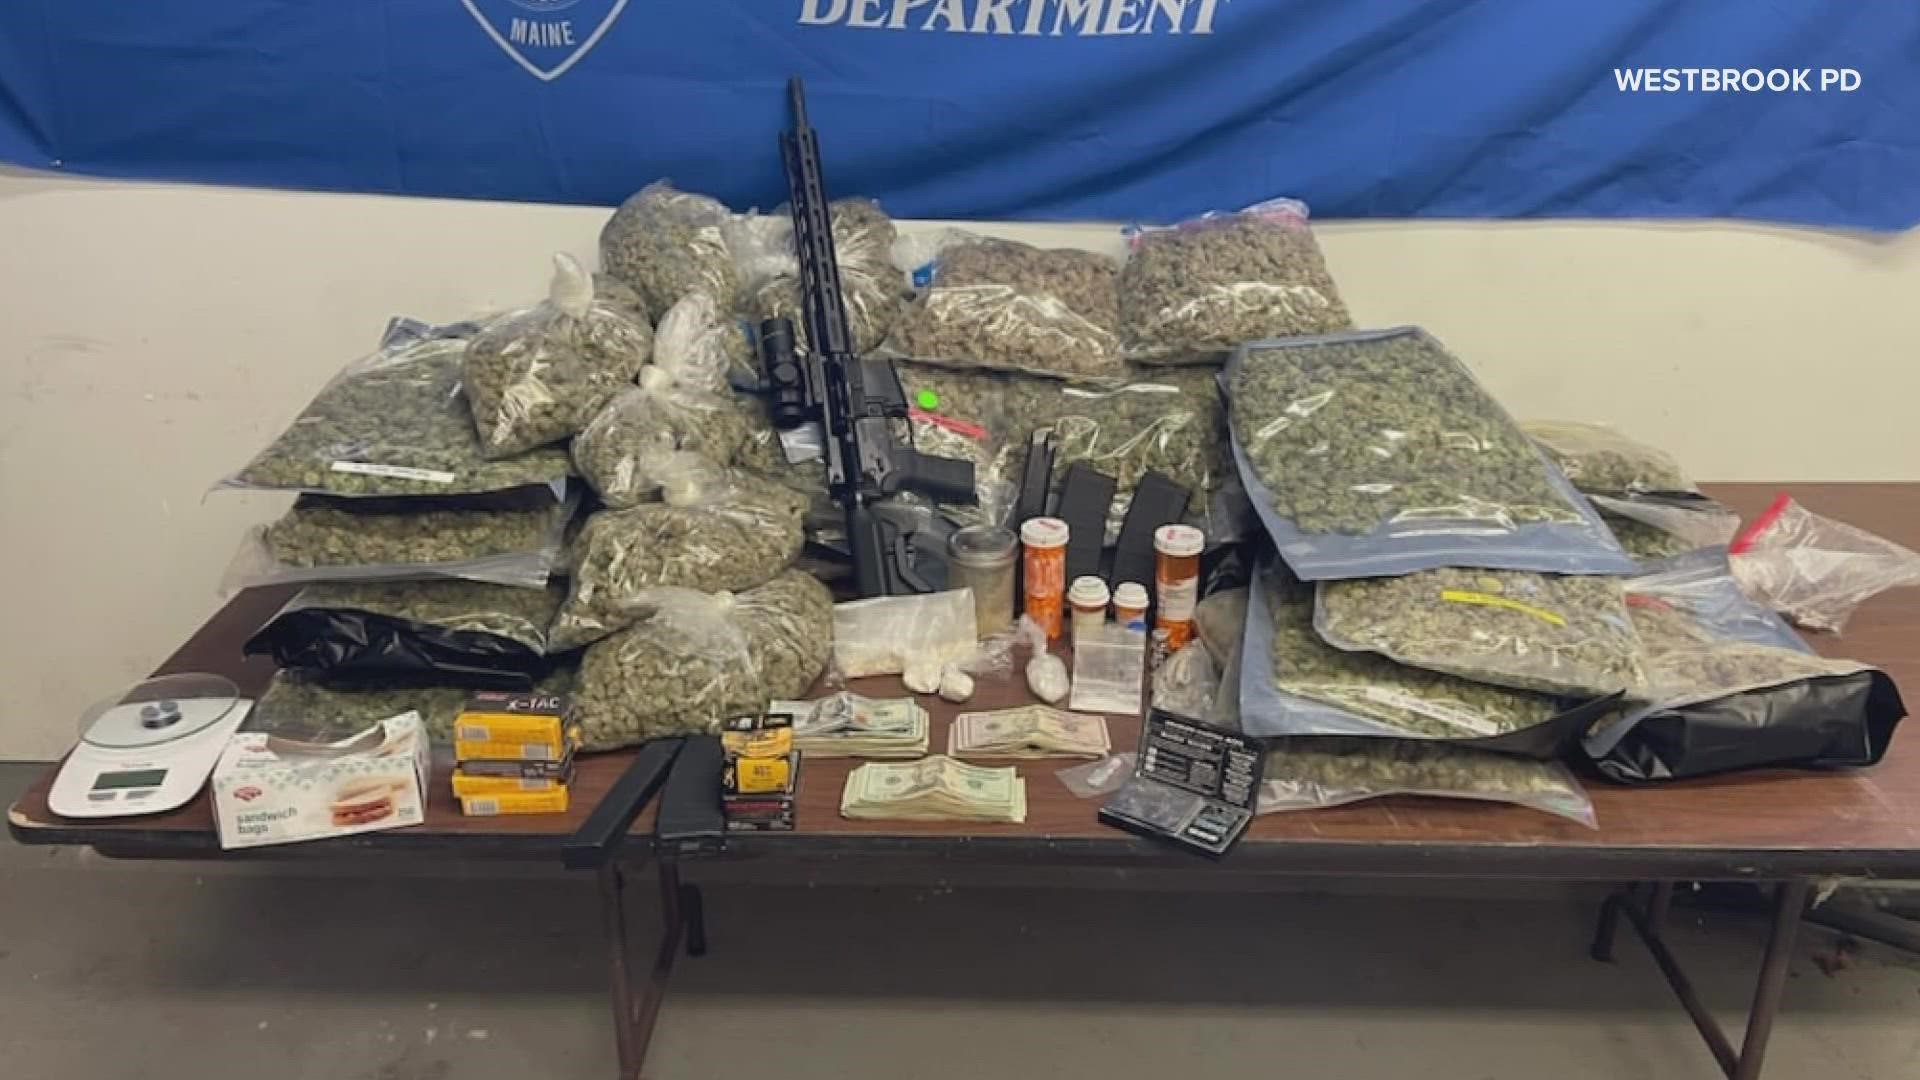 Police say they were conducting an investigation when they found cocaine, ketamine, LSD, various pills, marijuana, and an AR-15 rifle.